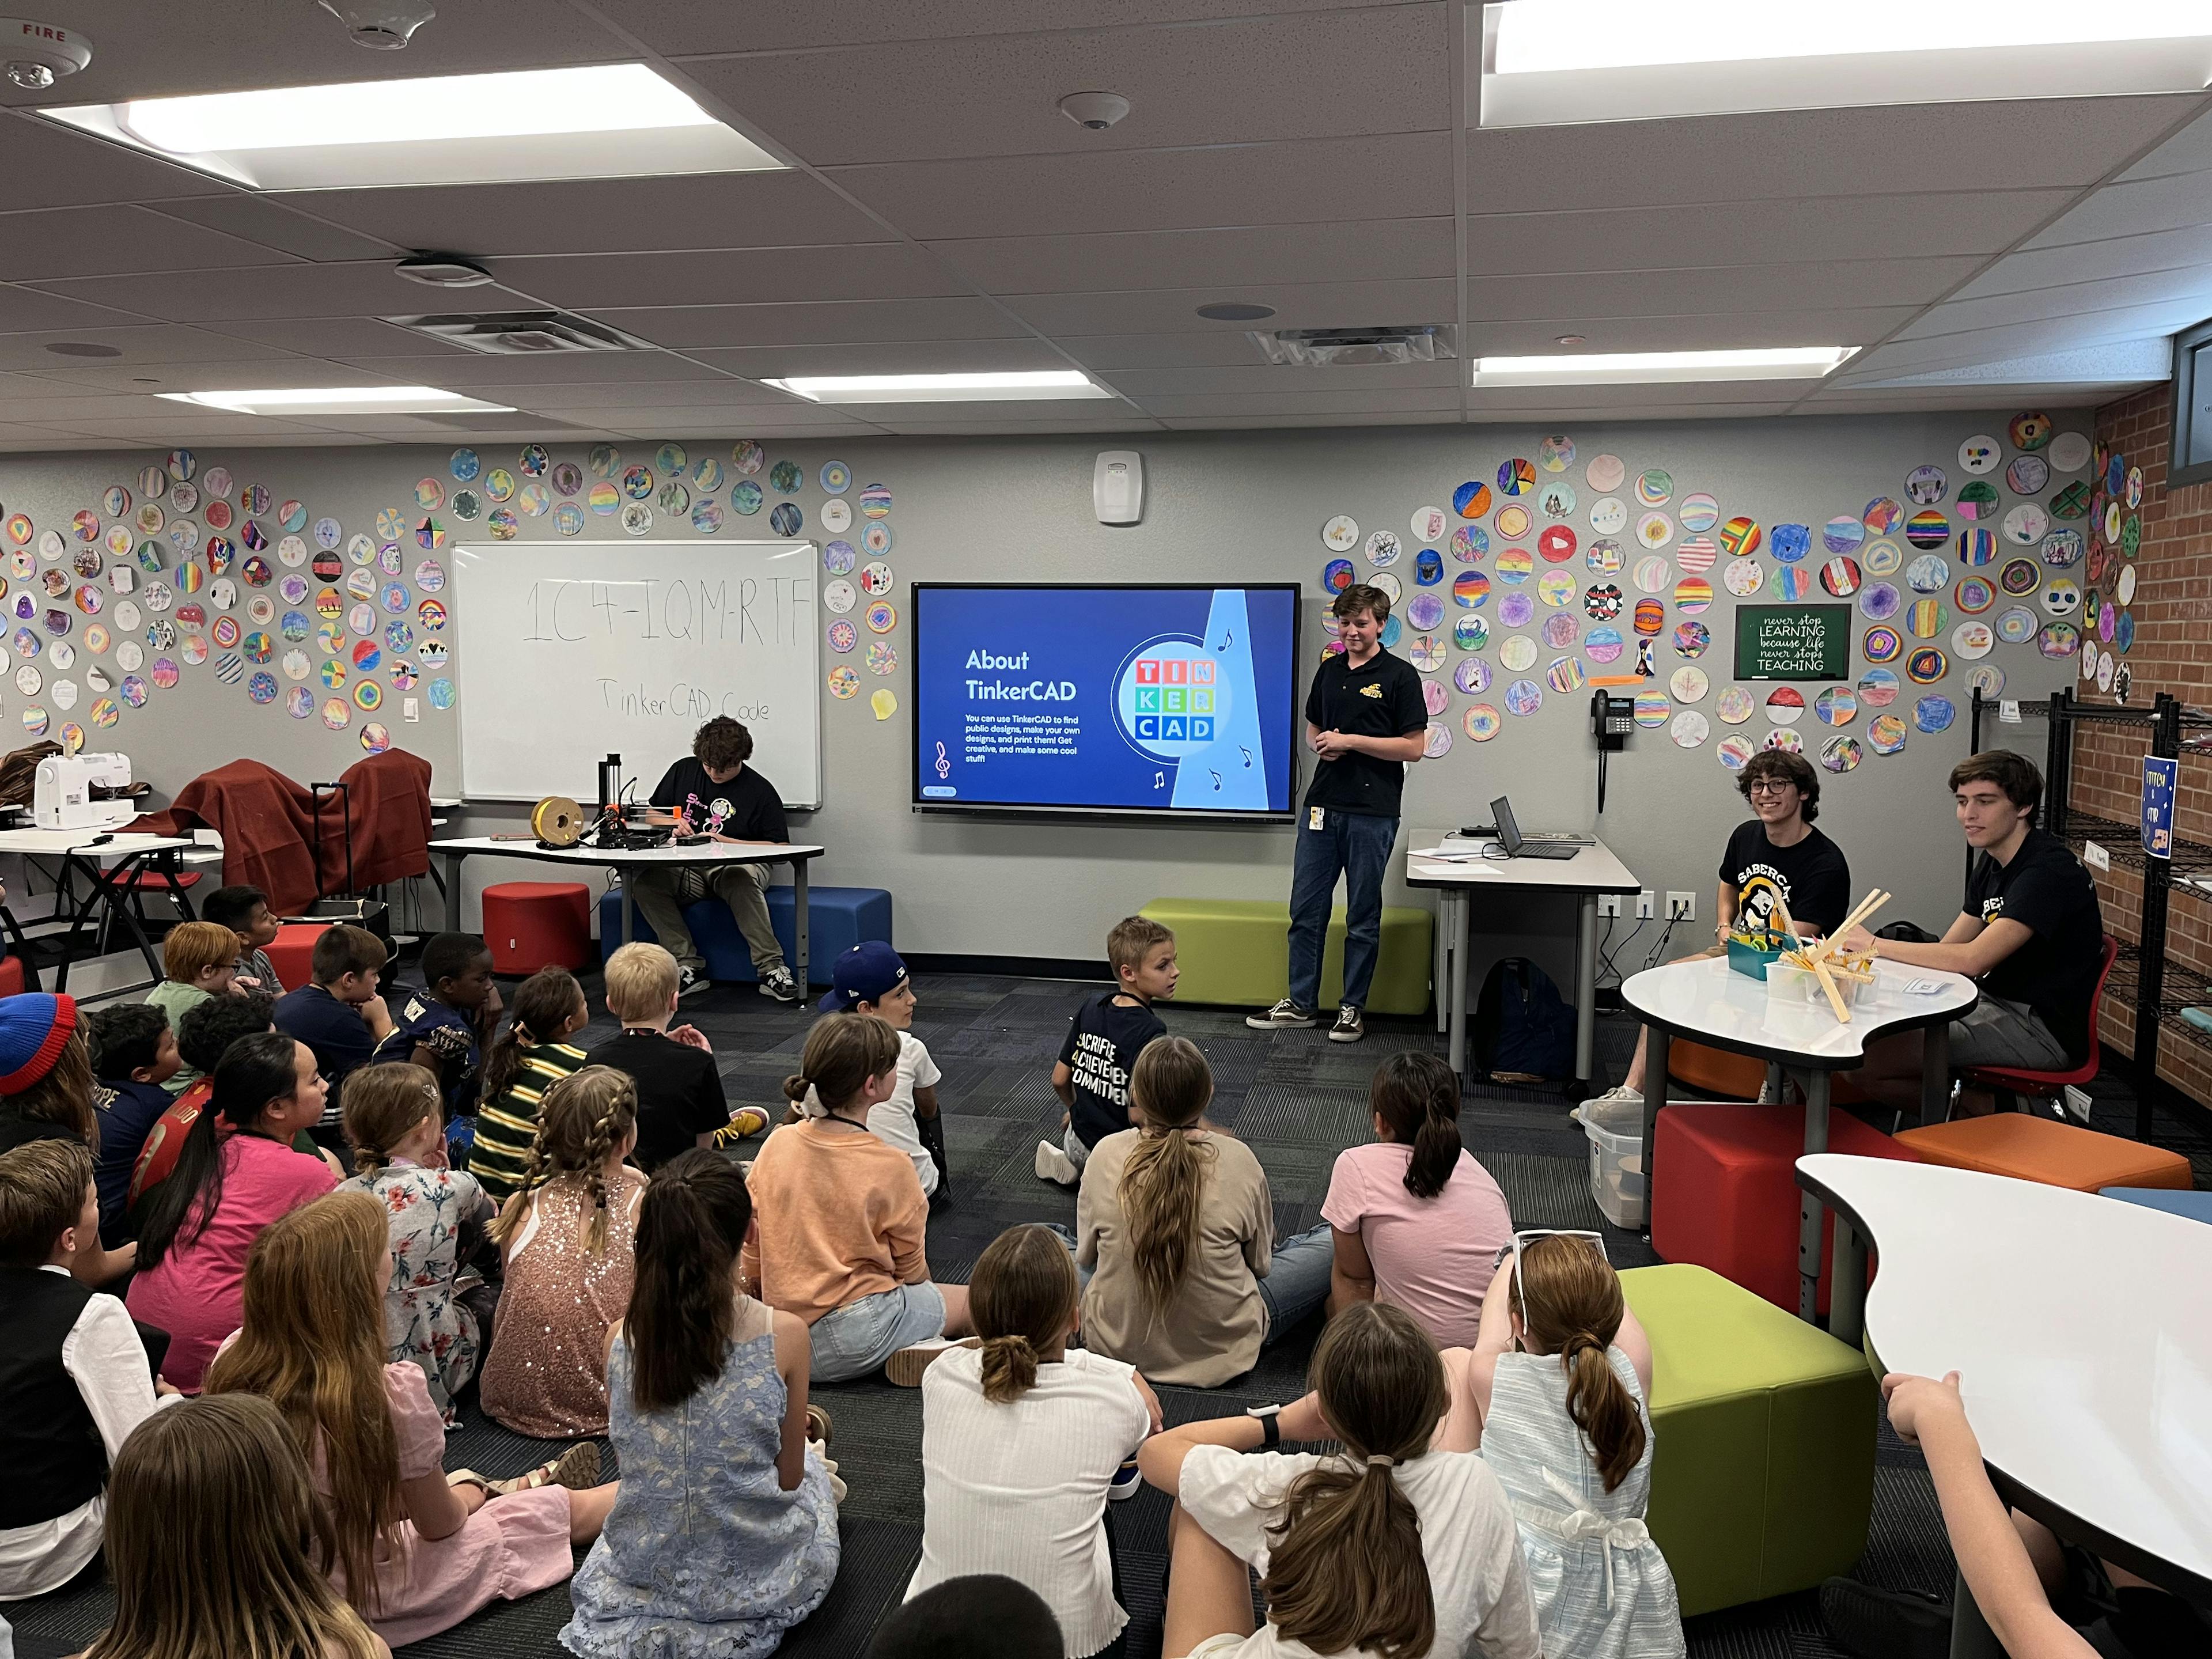 Melody Makers volunteers presenting to elementary school students how to use TinkerCAD, an online 3D printing program.